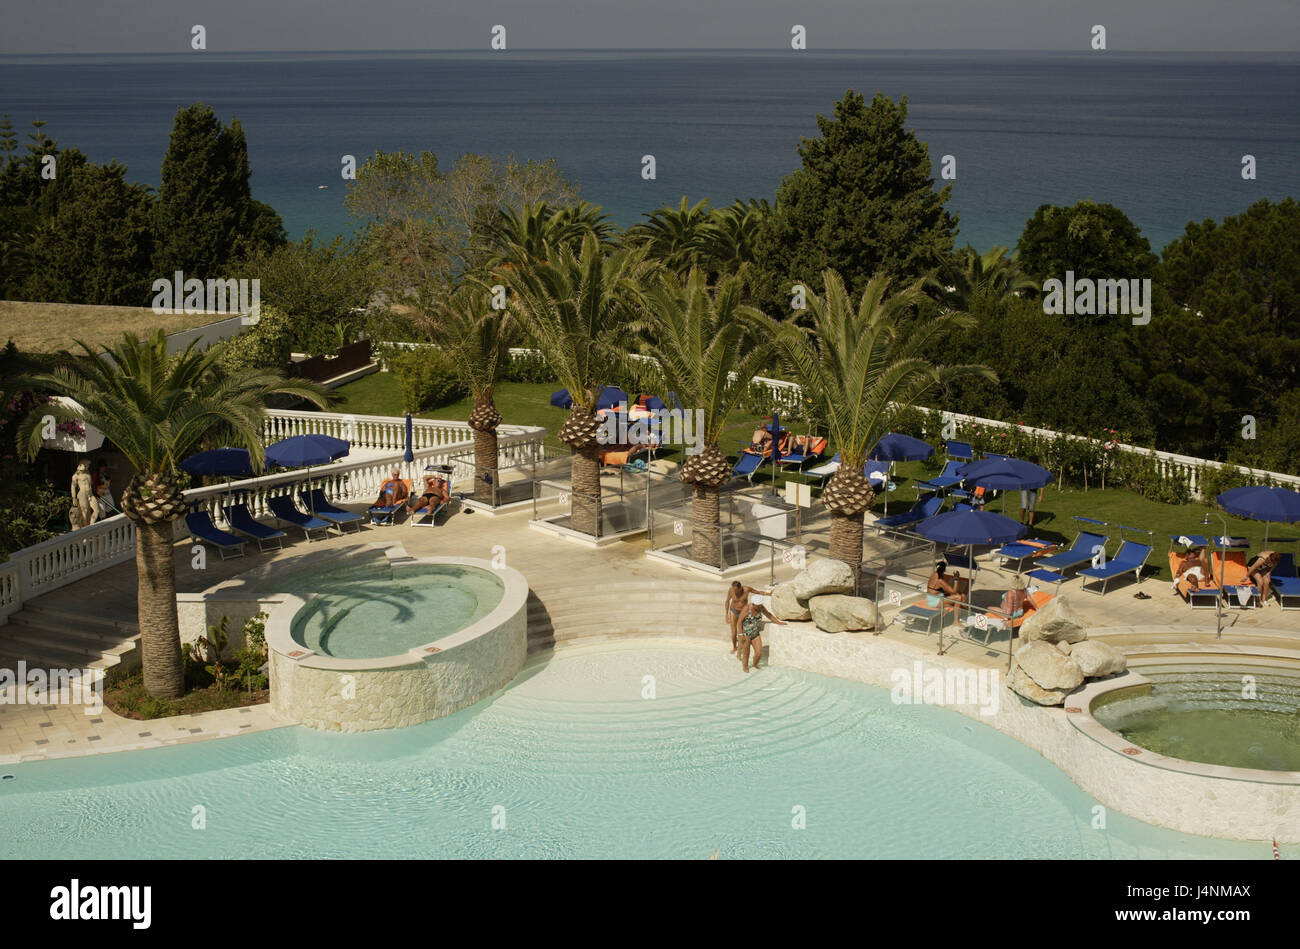 Italy, Calabria, Tropea, hotel Rocca Nettuno, pool attachment, tourist, Süditalien, hotel facility, pool, swimming pool, palms, deck chairs, people, détente, vacation, beach holiday, summer vacation, sea view, travel destination, tourism, hotel stay, Stock Photo